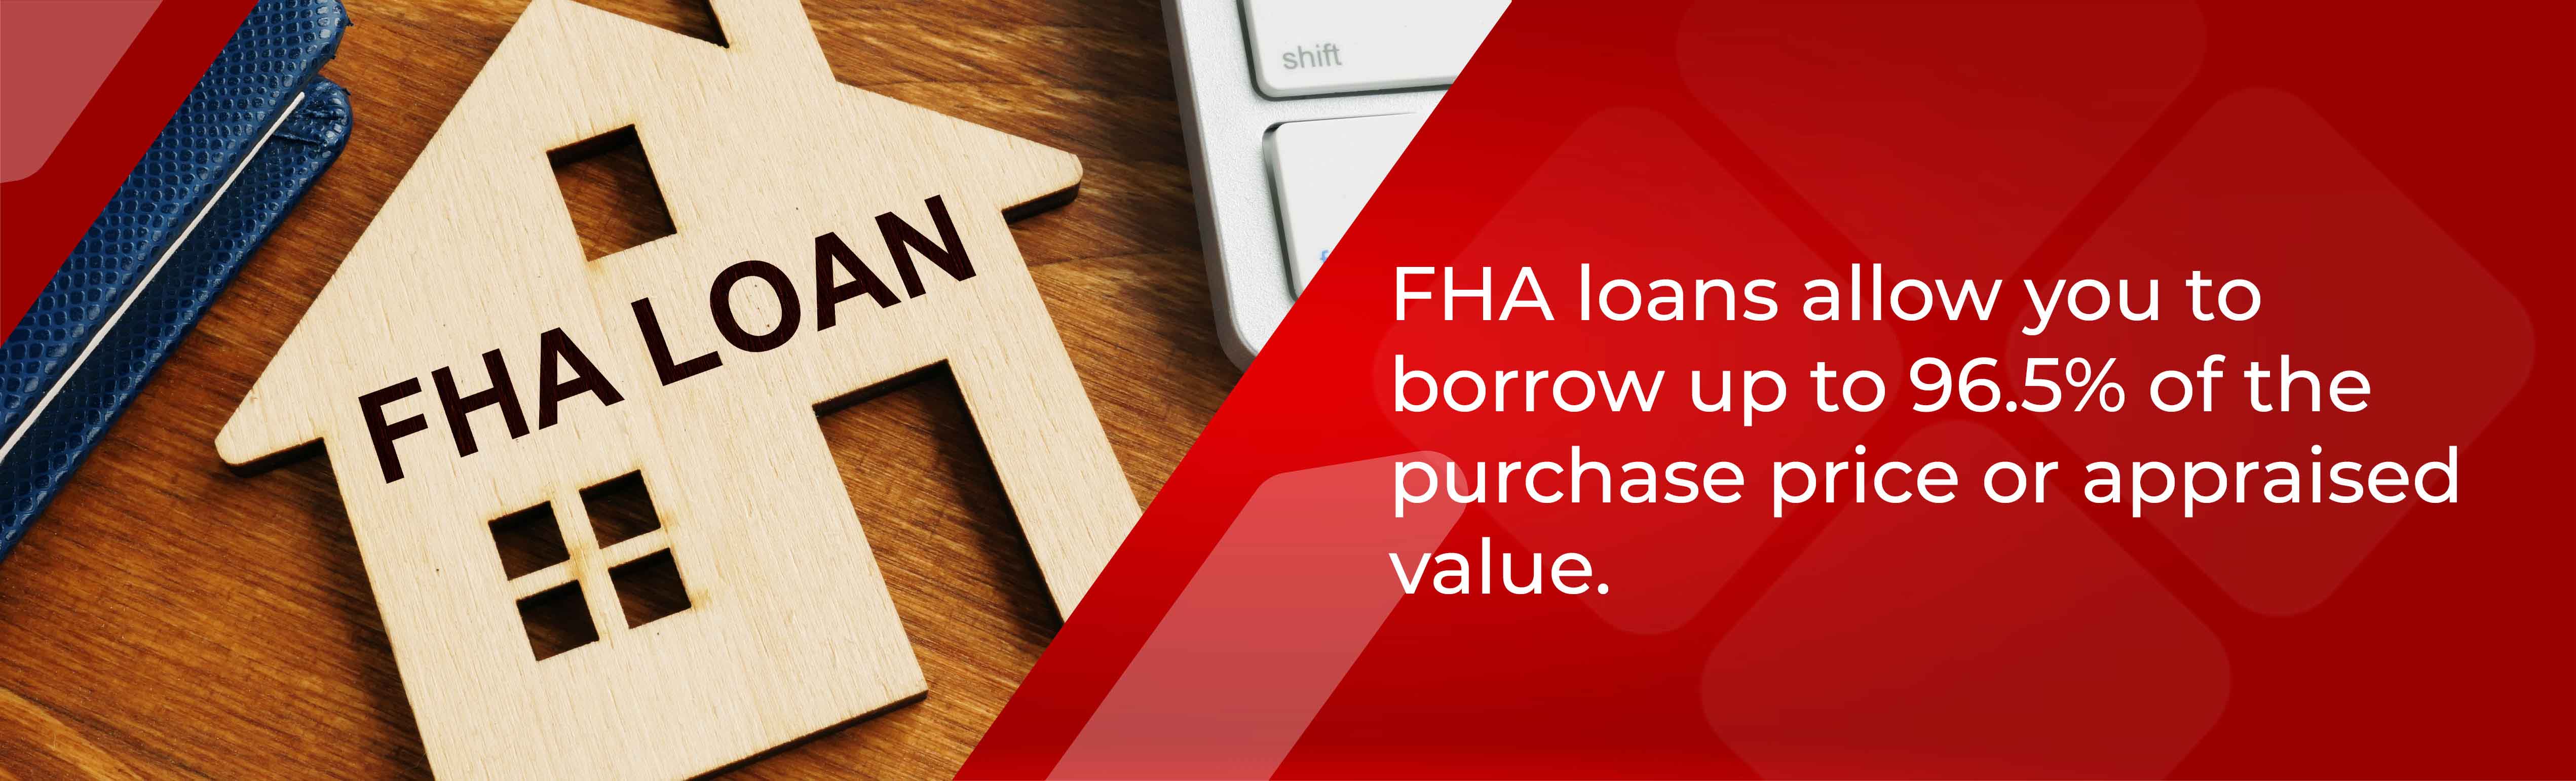 FHA loans allow you to borrow up to 96.5% of the purchase price or appraised value. 